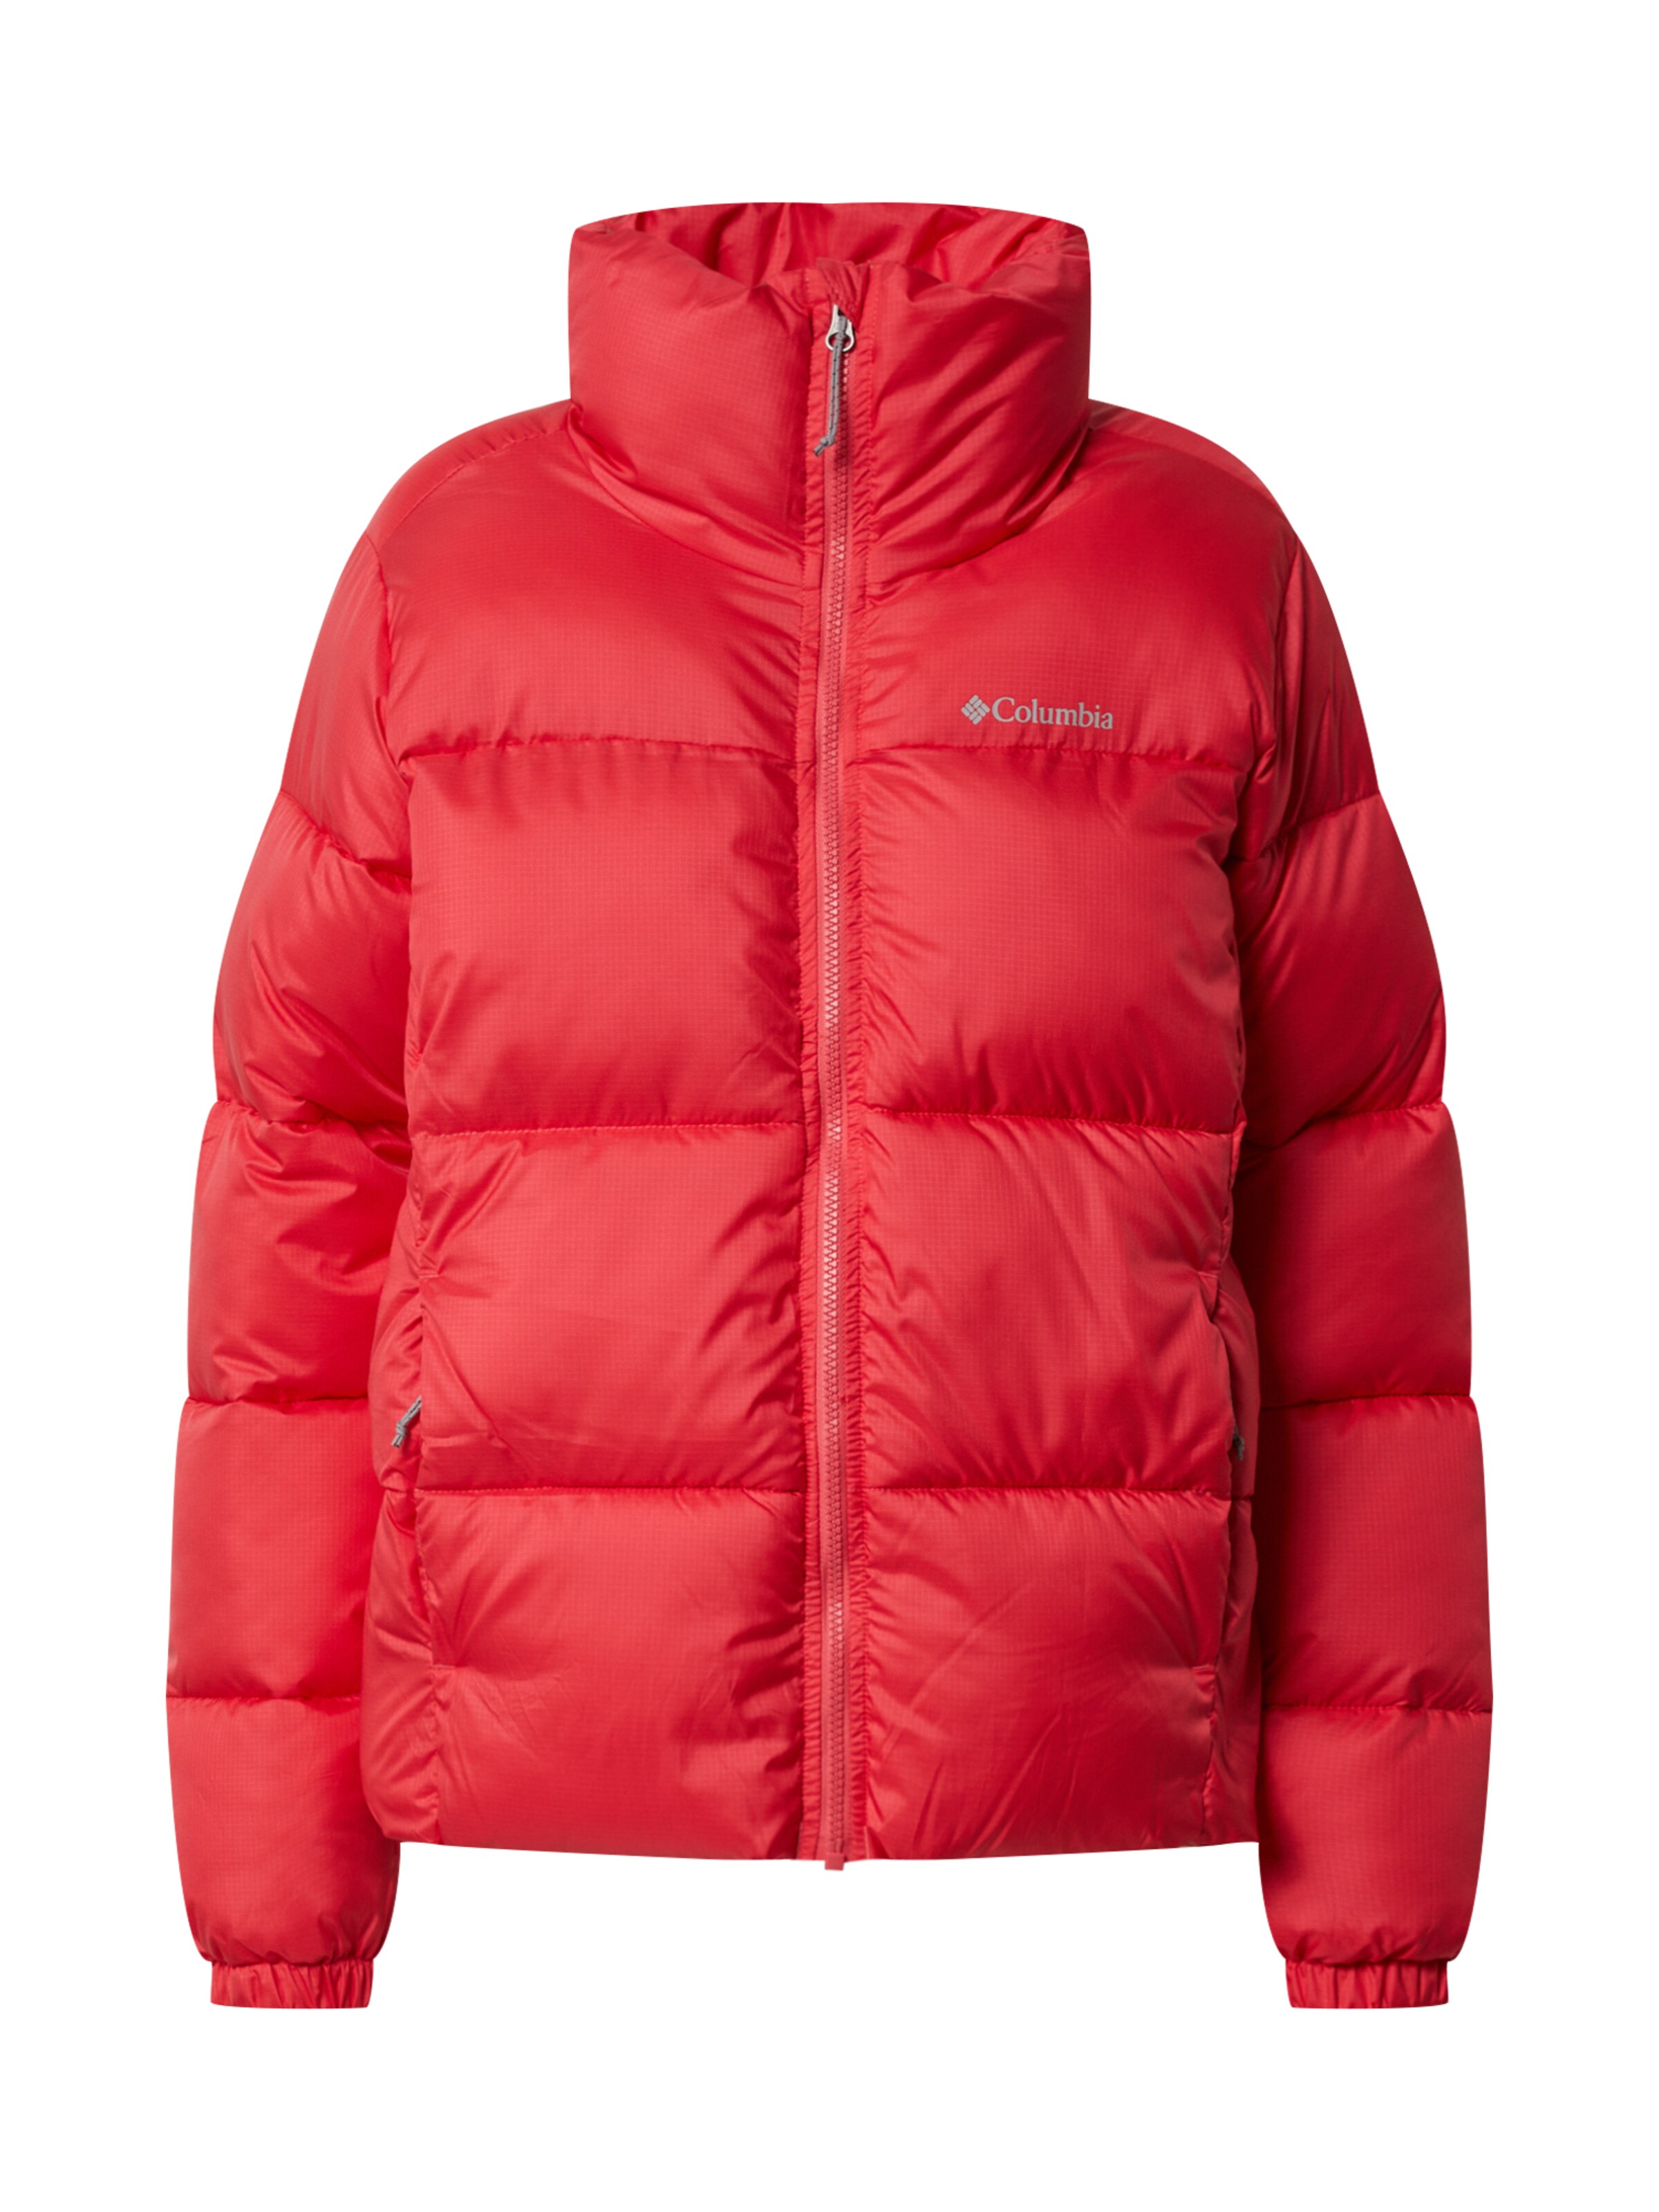 COLUMBIA Giacca per outdoor Puffect in Rosso 